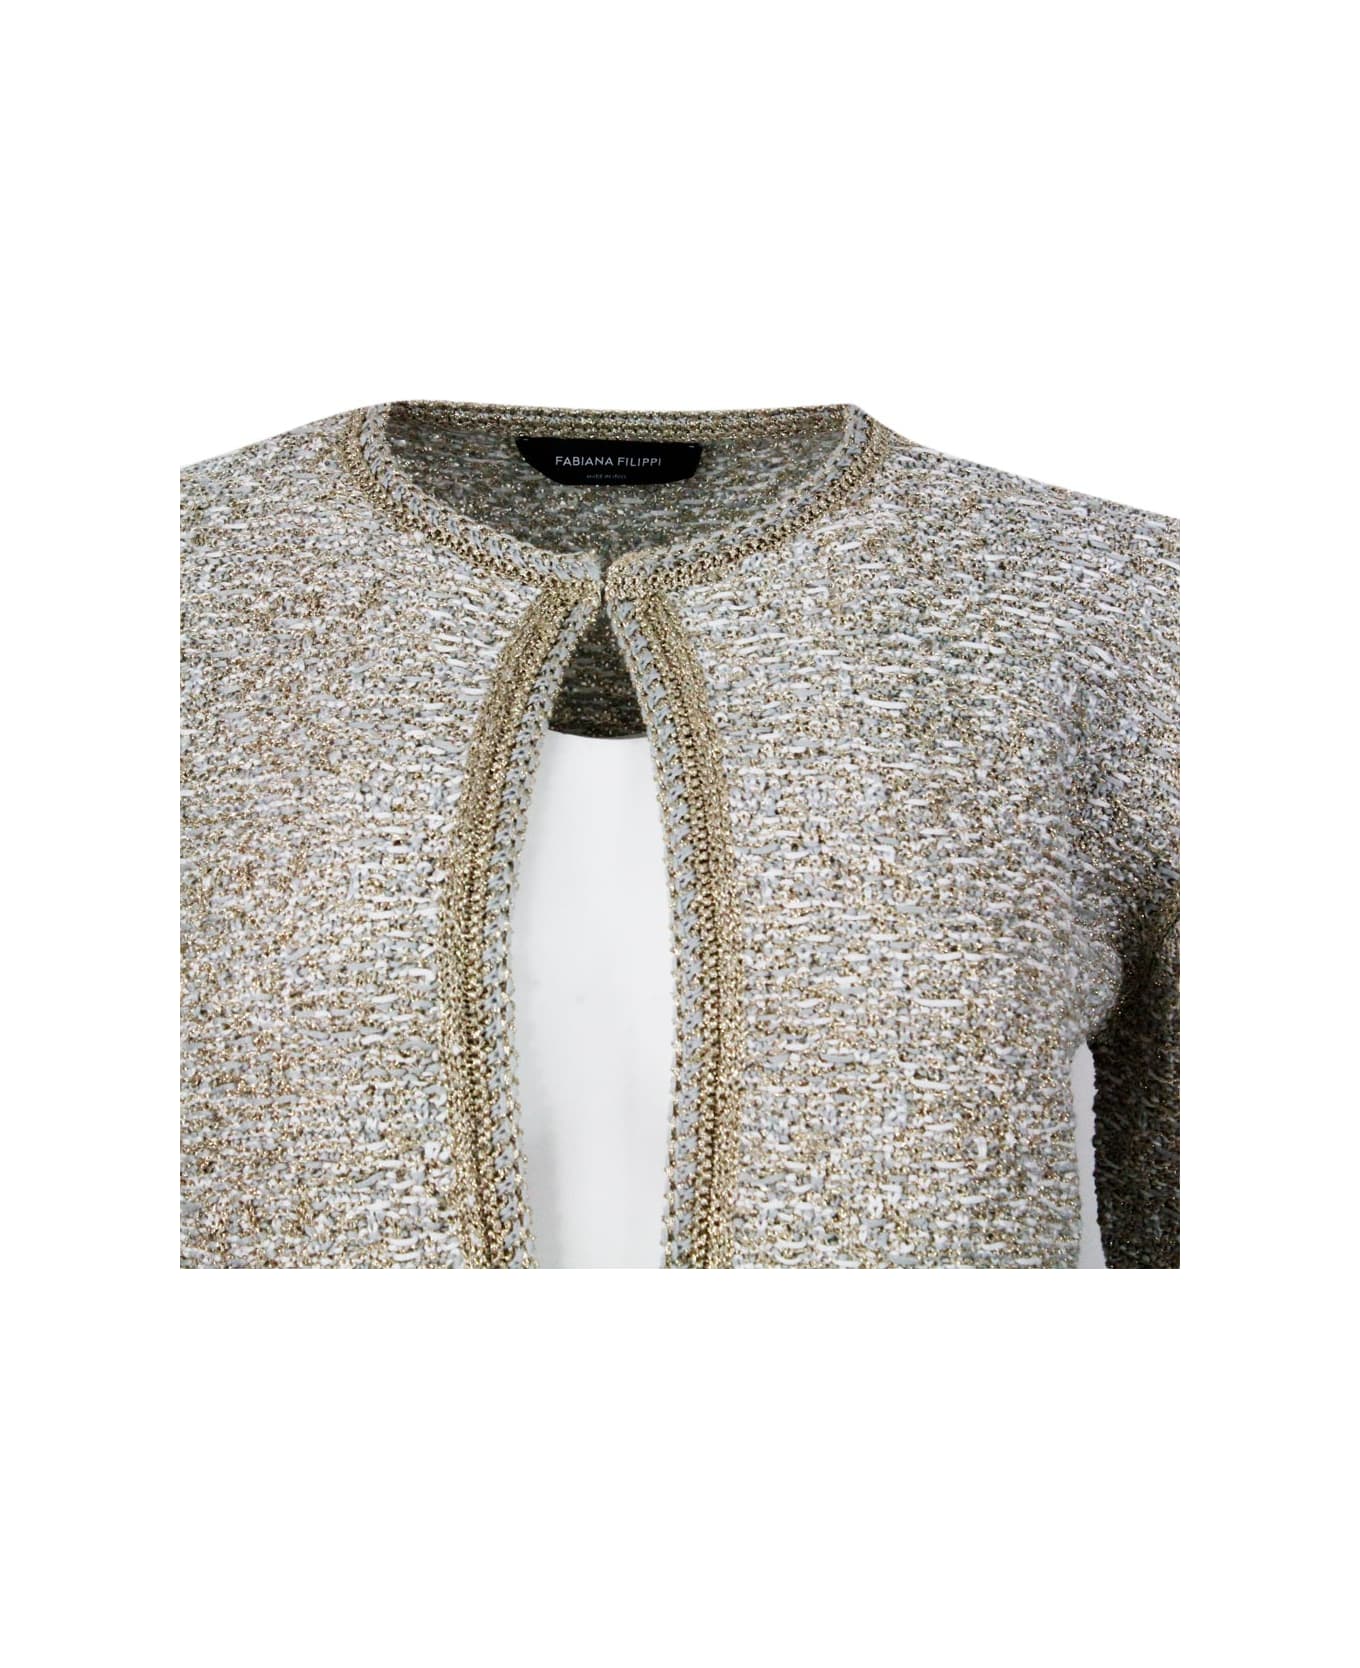 Fabiana Filippi Chanel-style Jacket Sweater Open On The Front And With Hook Closure Embellished With Bright Lurex Threads - Grigio Chiaro/Bianco/Oro カーディガン